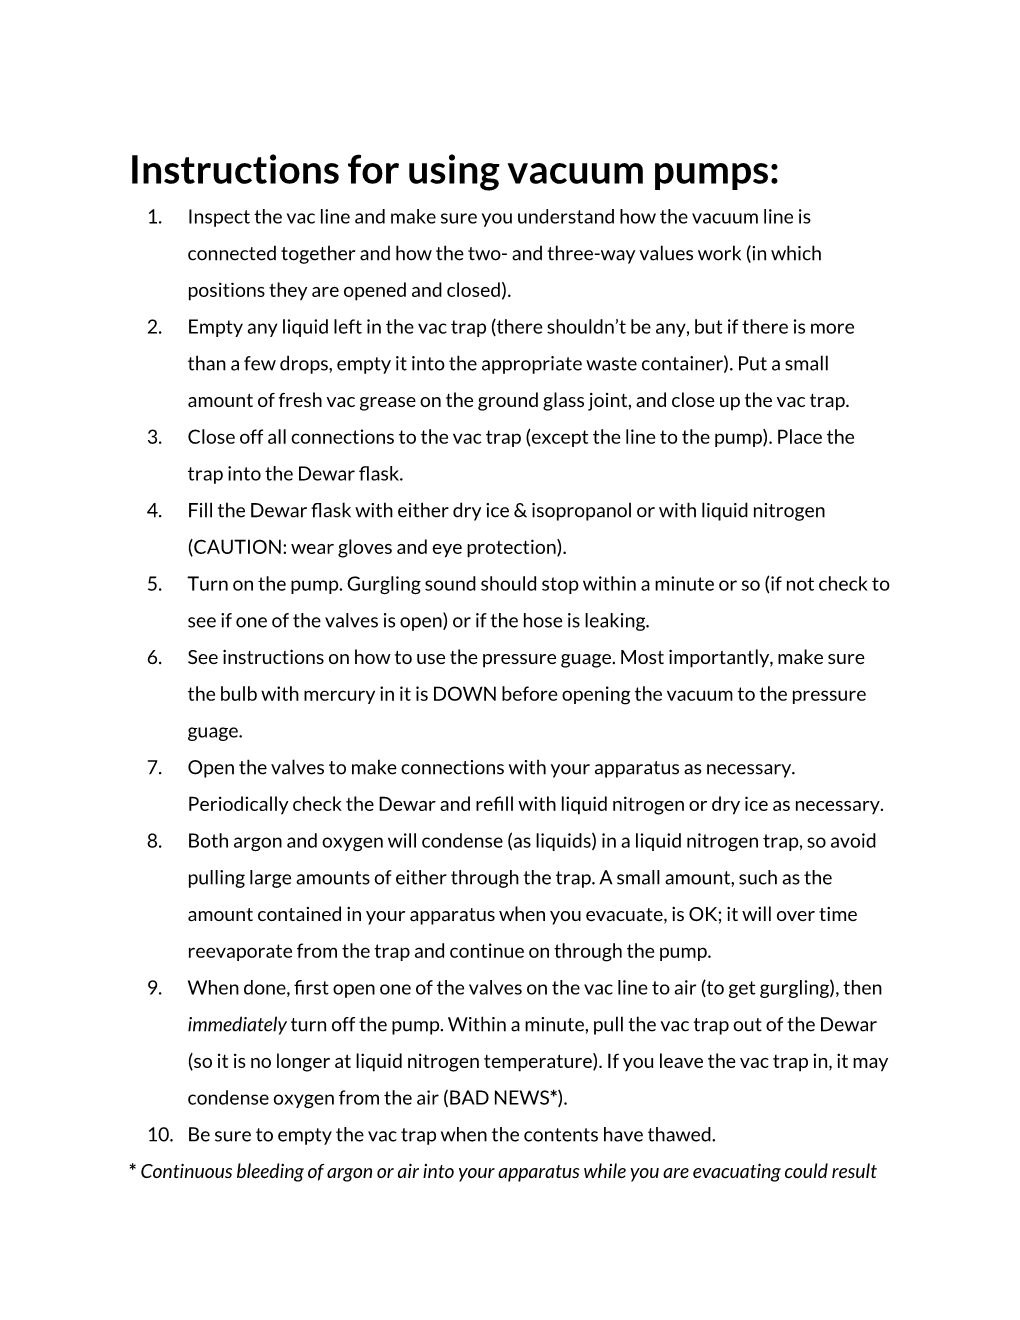 Instructions for Using Vacuum Pumps: 1